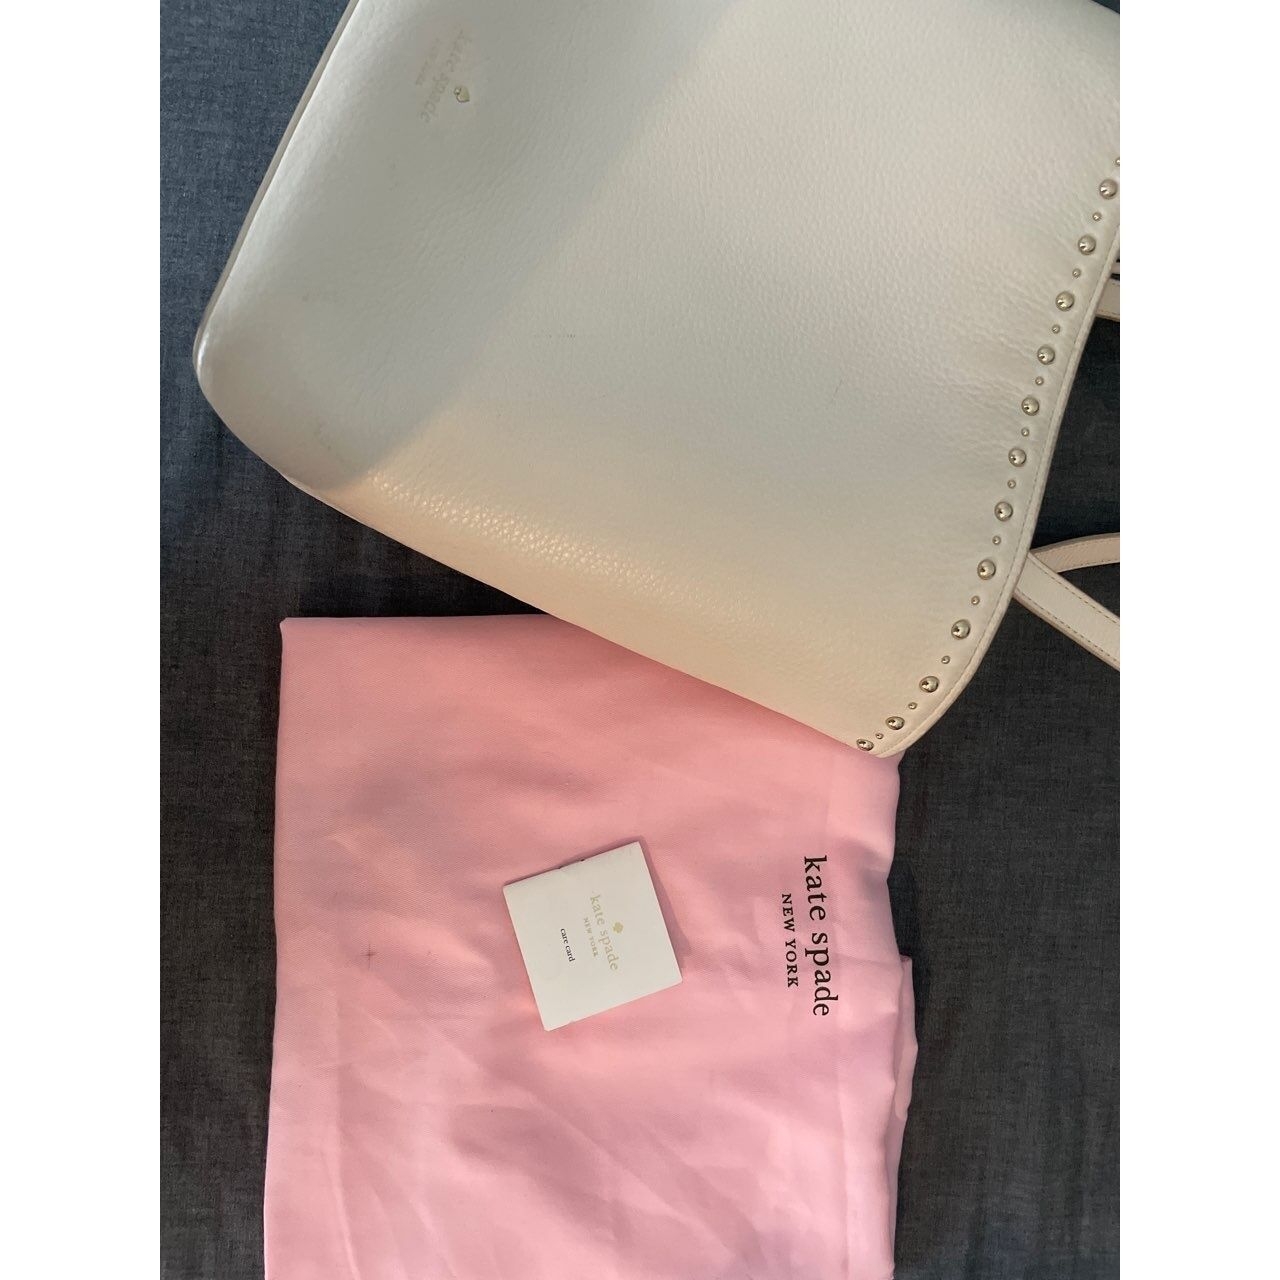 Kate Spade Hayes Street Studded Hattie Off White Tote Bag